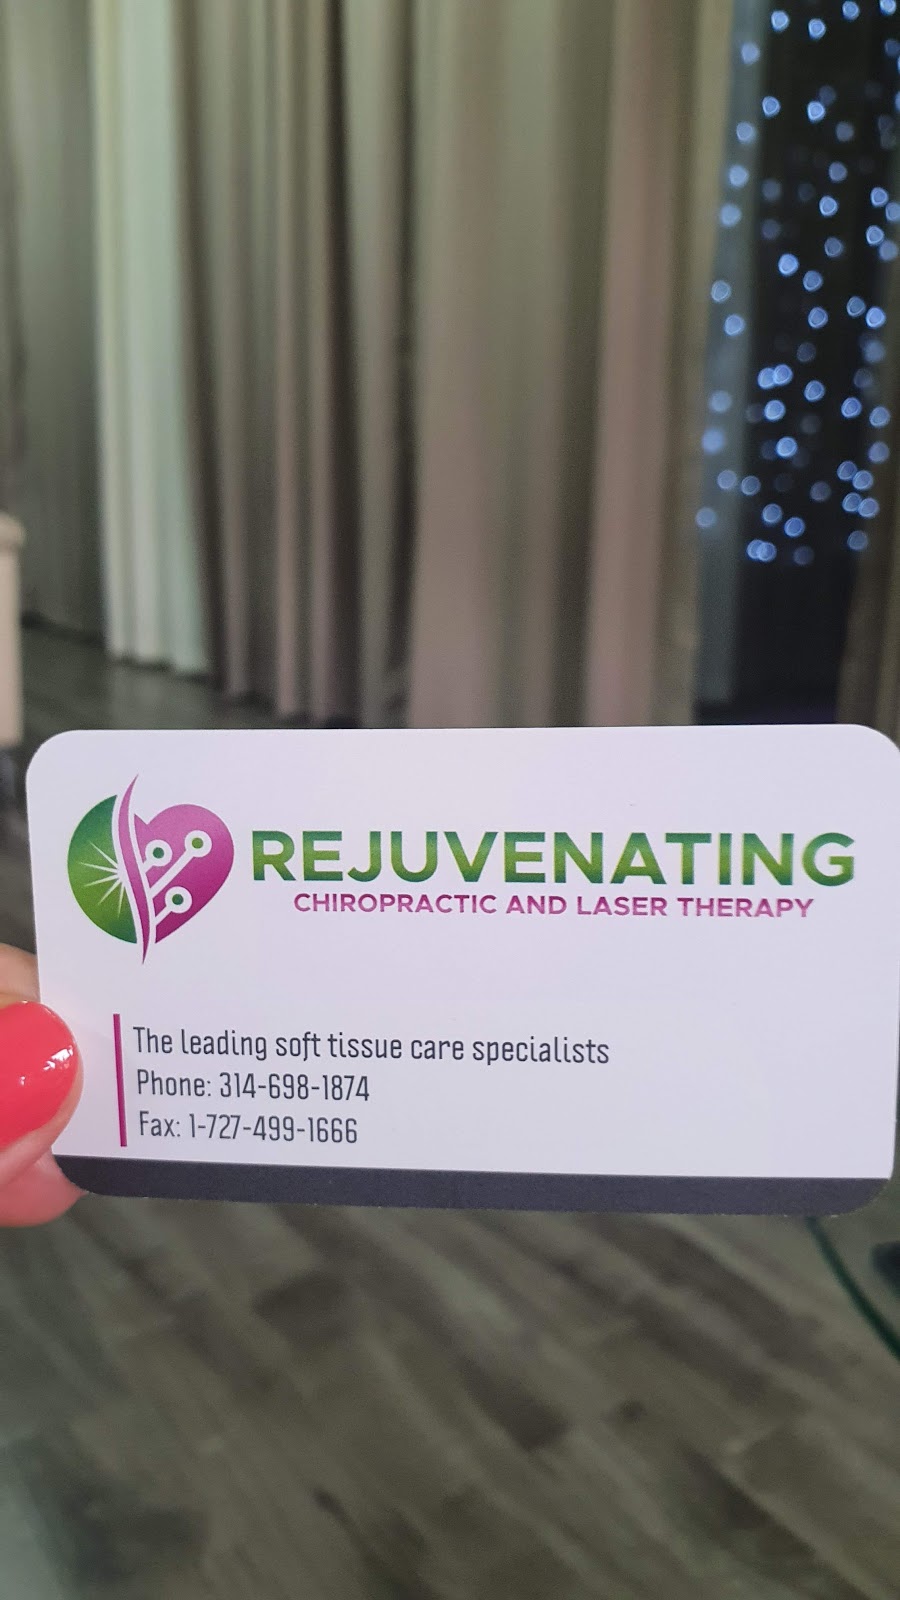 Rejuvenating Chiropractic and Laser Therapy LLC | 11733 N Dale Mabry Hwy, Tampa, FL 33618 | Phone: (314) 698-1874